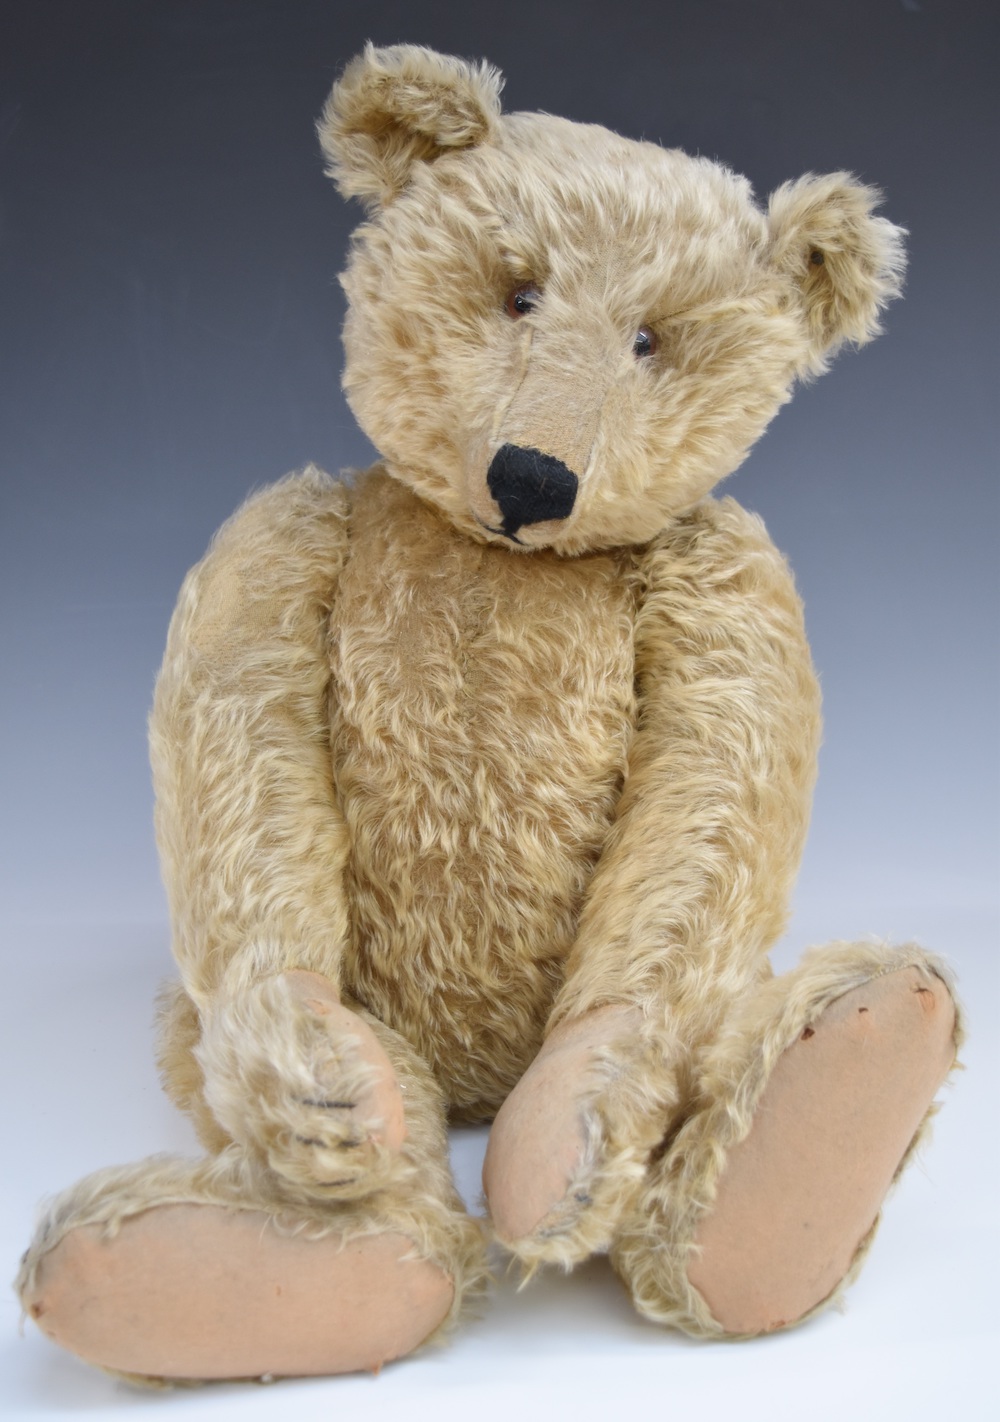 Steiff Teddy Bear 'Tyllson' With Growler, Blonde Mohair, Straw Filling, Disc Joints, Stitched Features And Button To Ear, 54Cm Tall. £2400